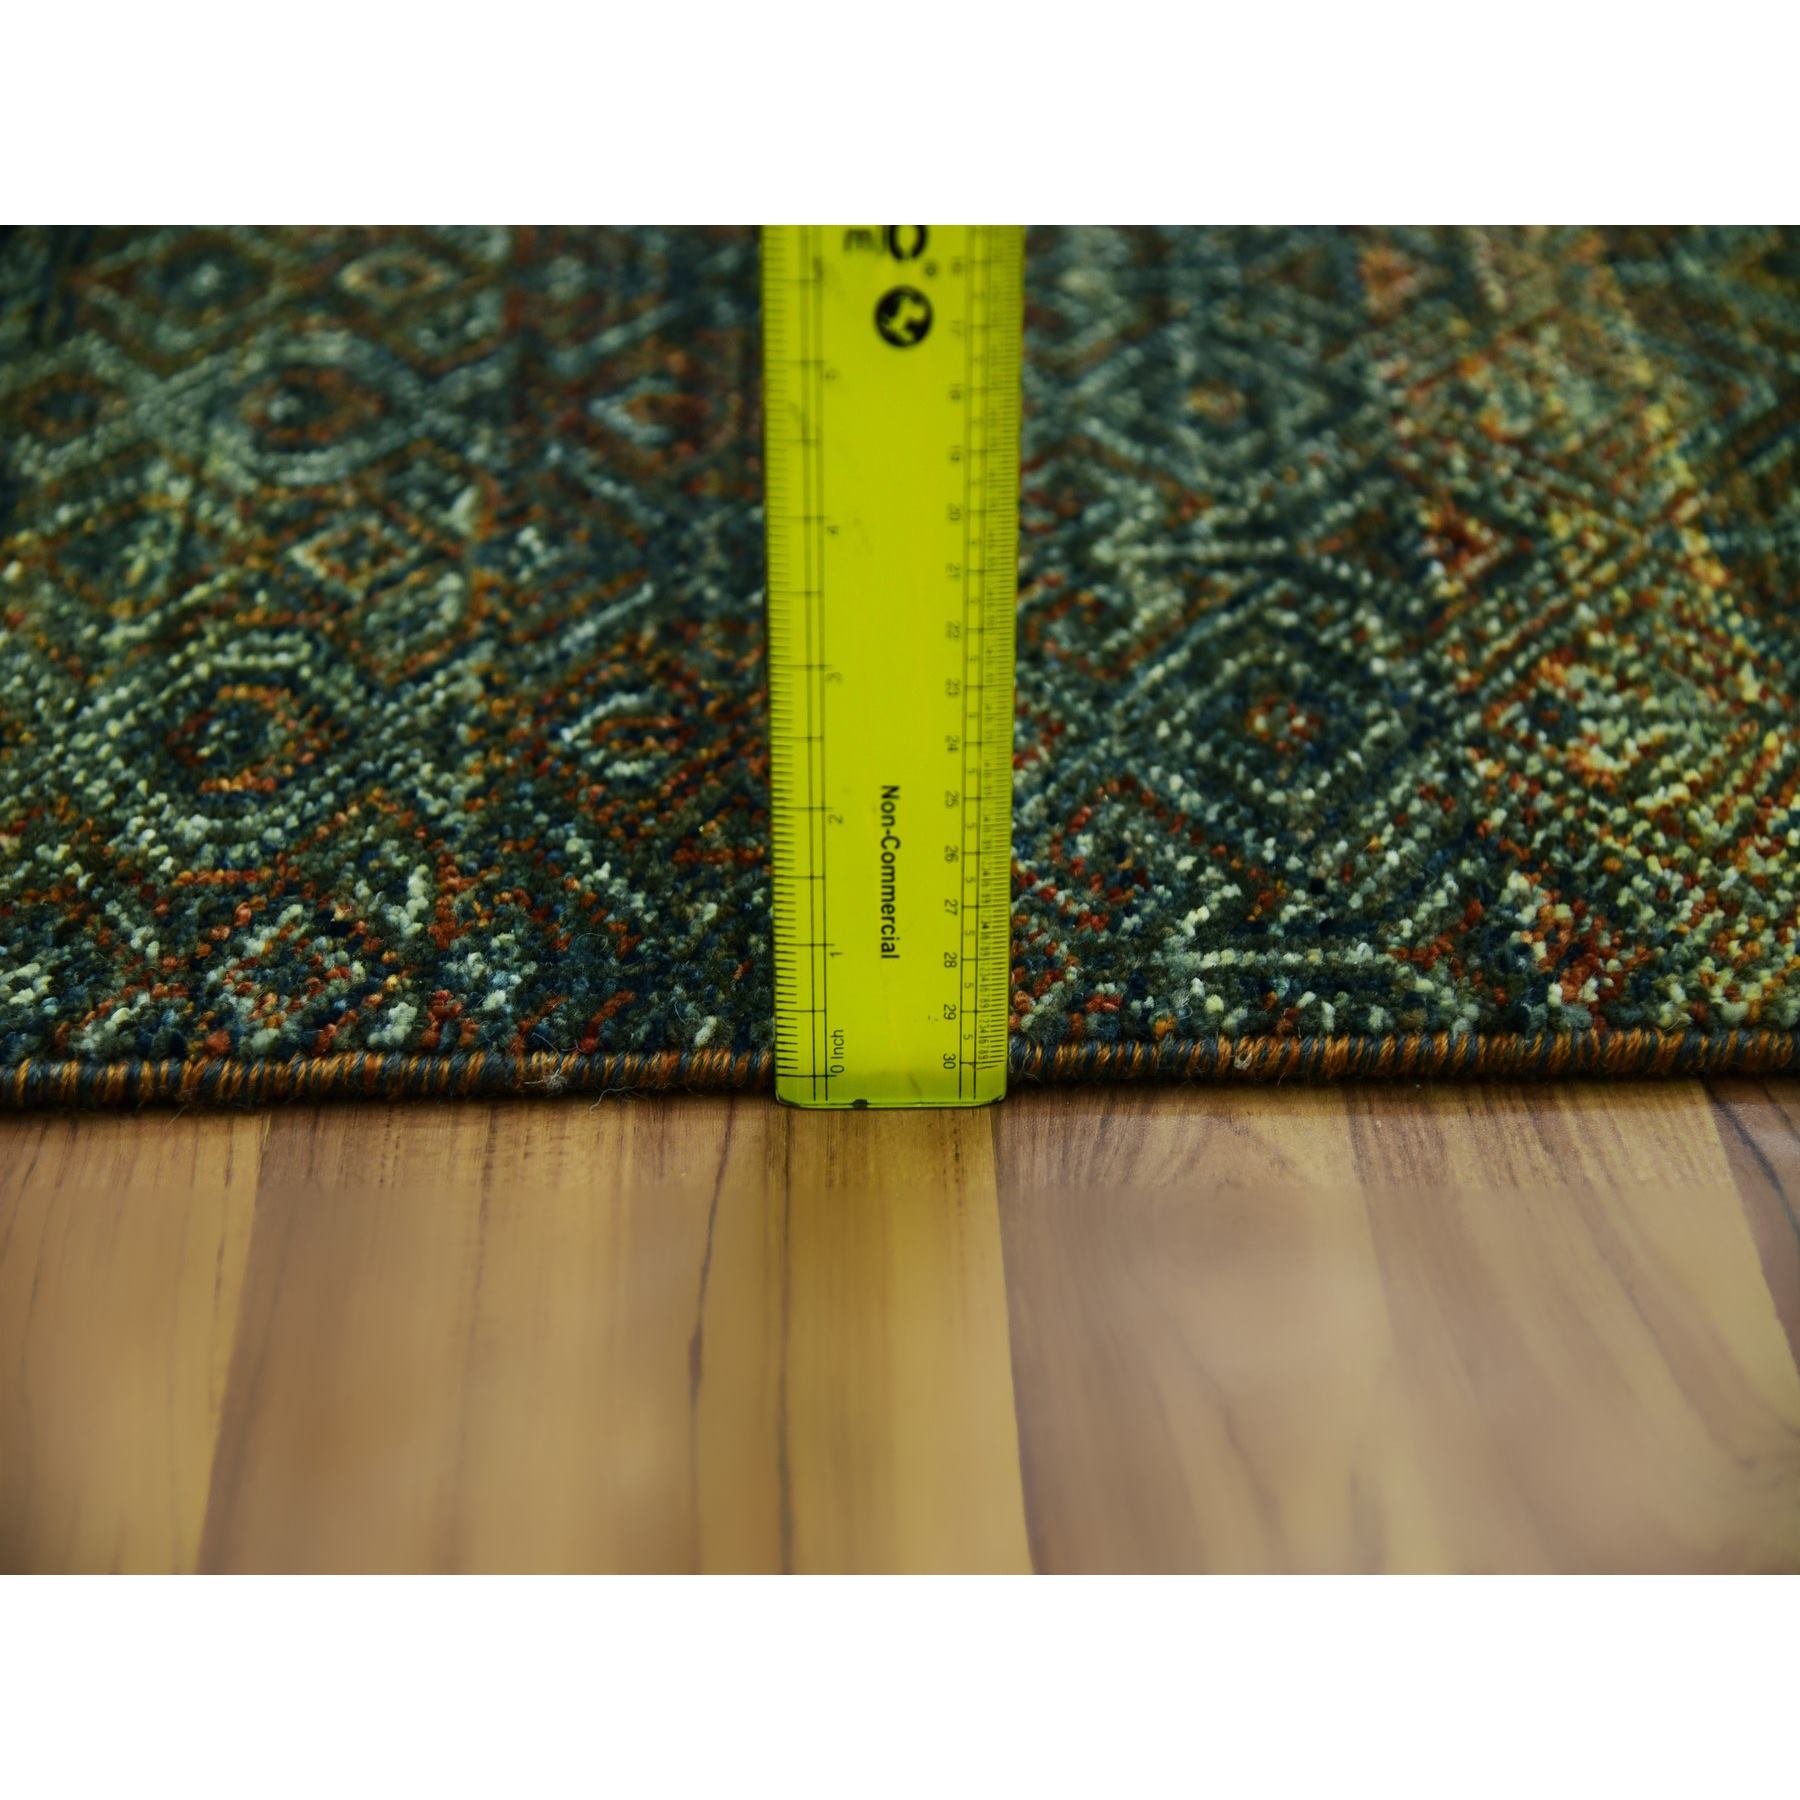 Modern-and-Contemporary-Hand-Knotted-Rug-397425